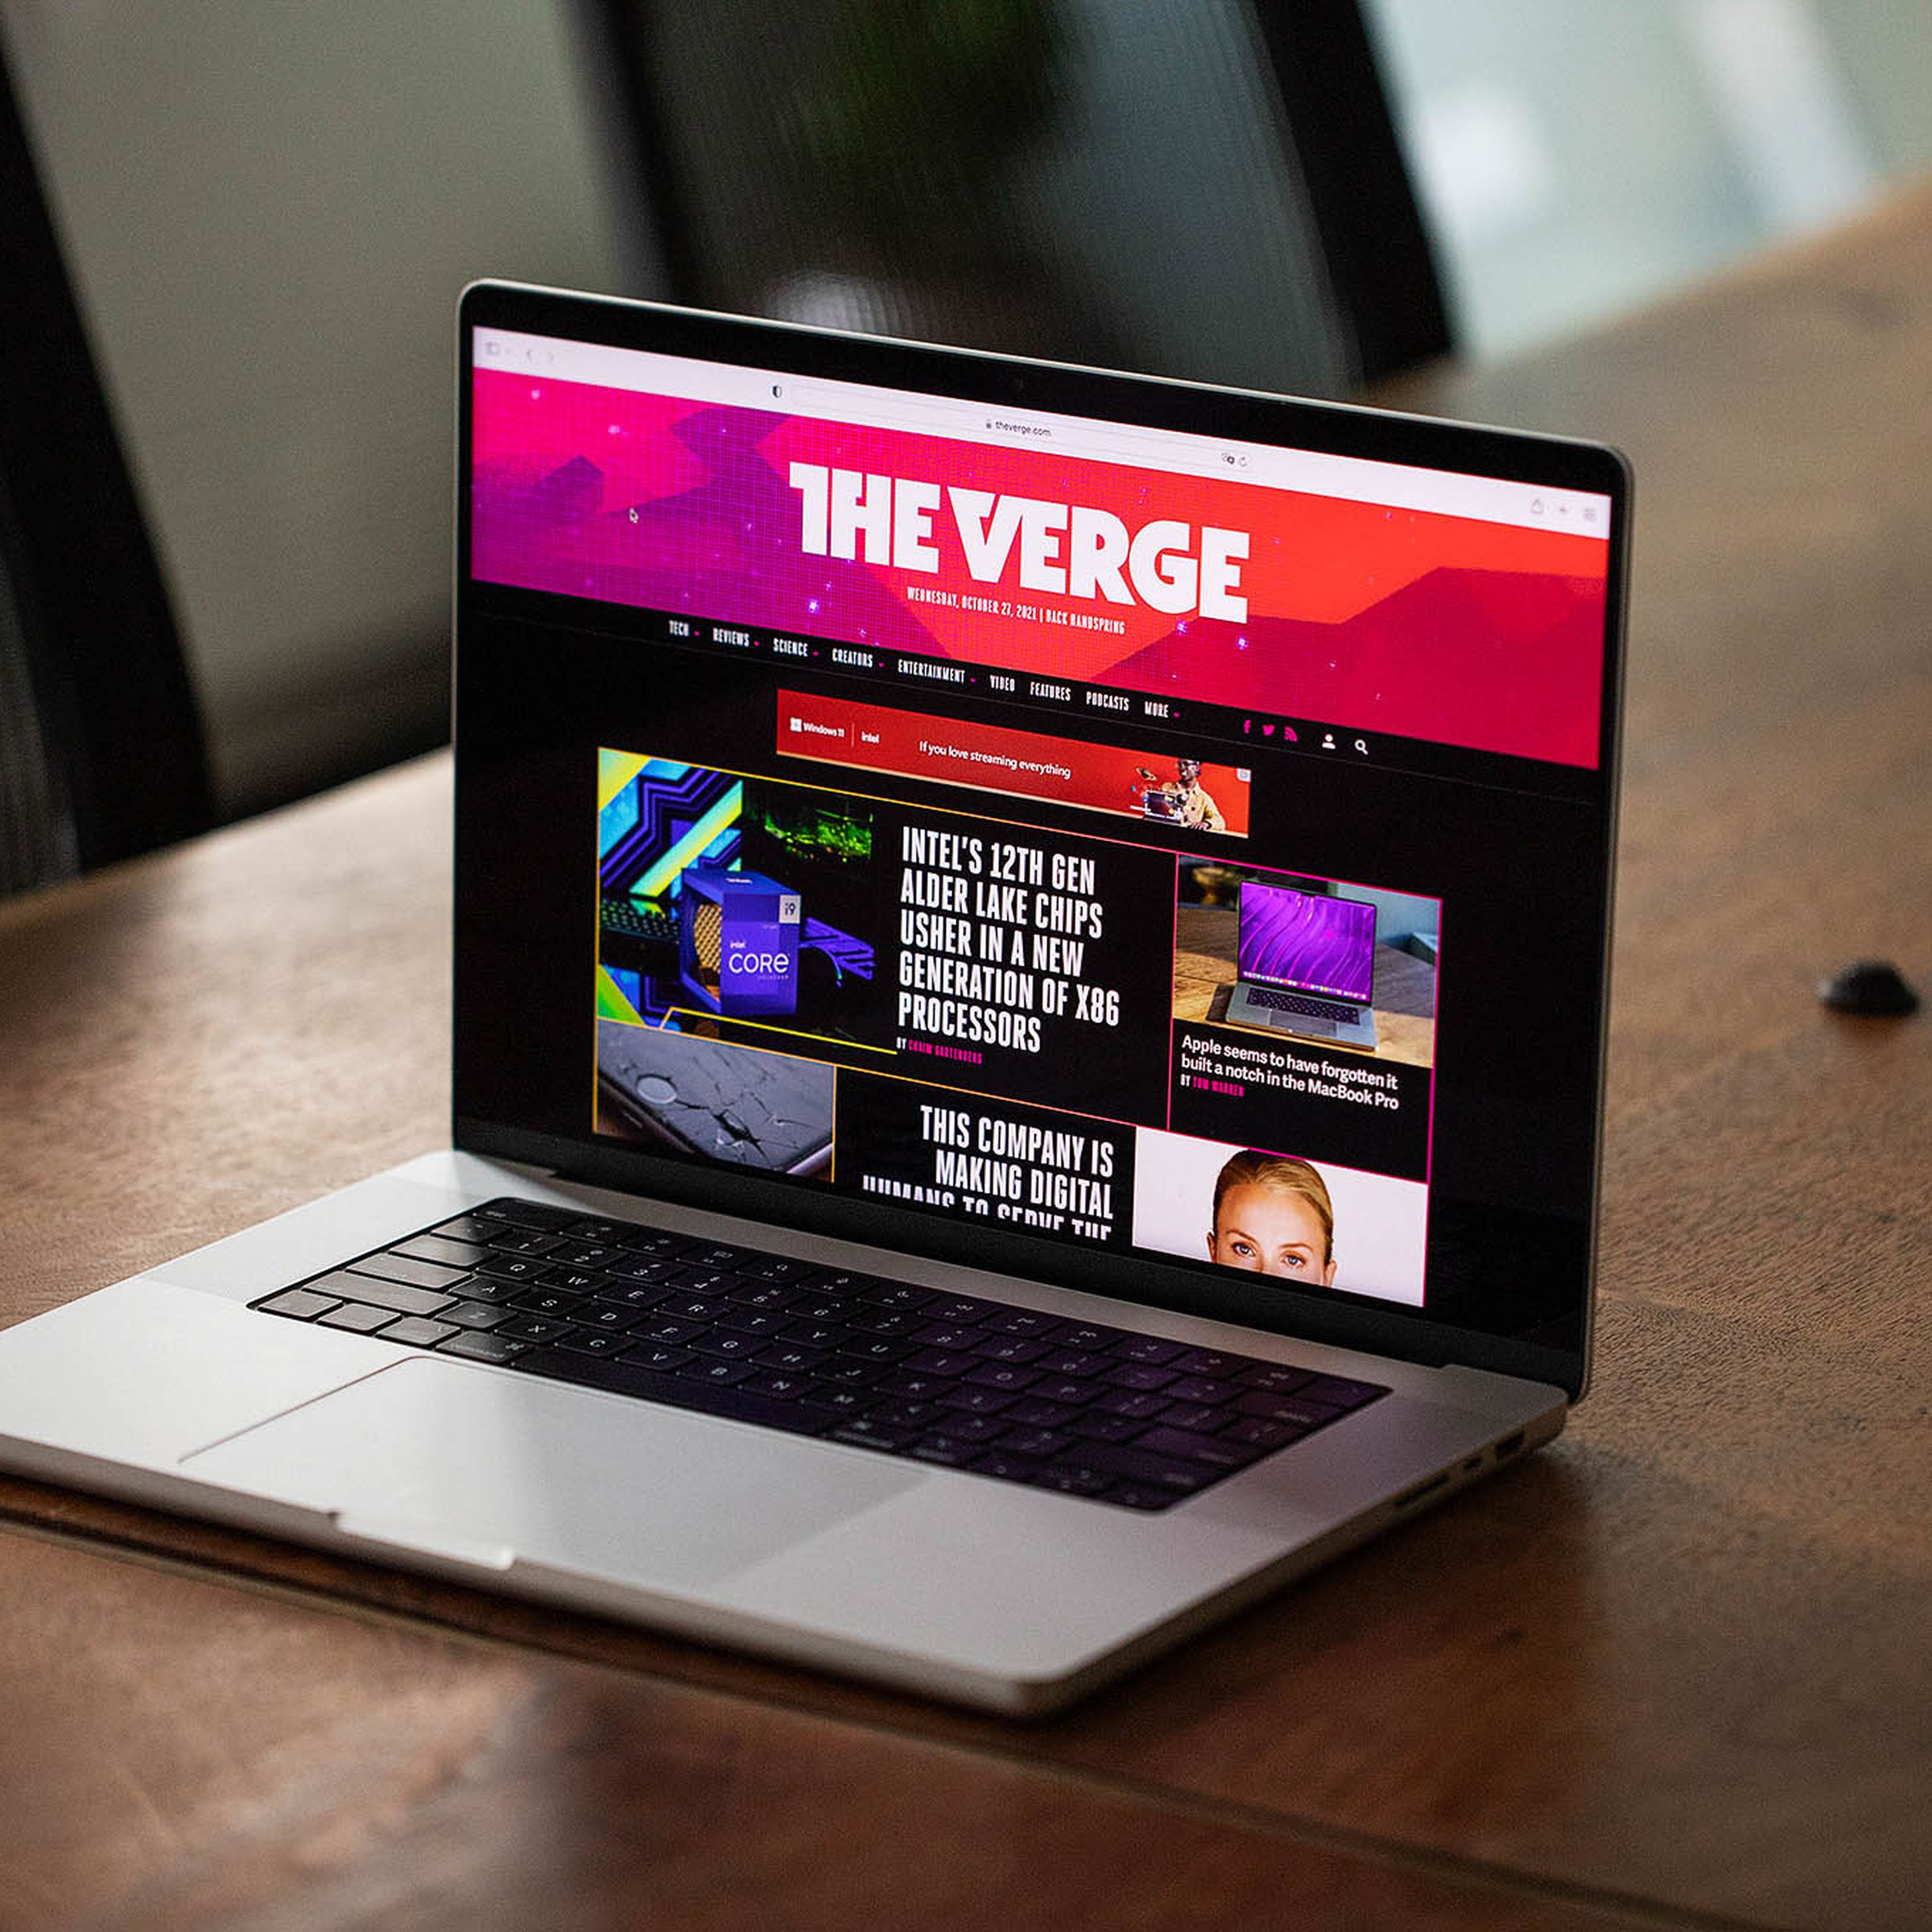 Apple’s 2021 14-inch MacBook Pro is opened on a wooden table. Its display is showing off The Verge’s homepage.